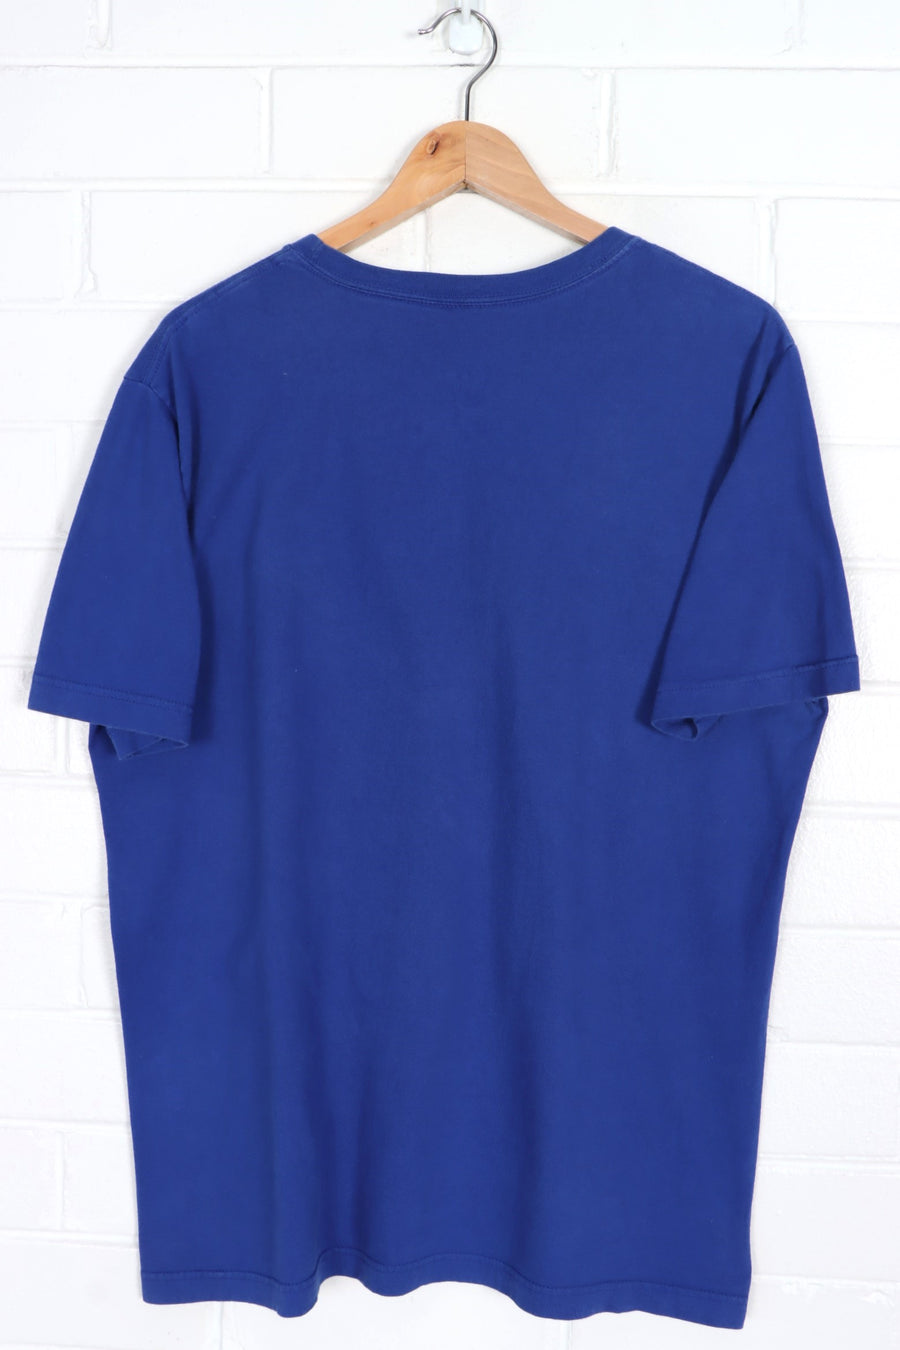 NIKE Embroidered Swoosh Logo Casual Blue T-Shirt (L)